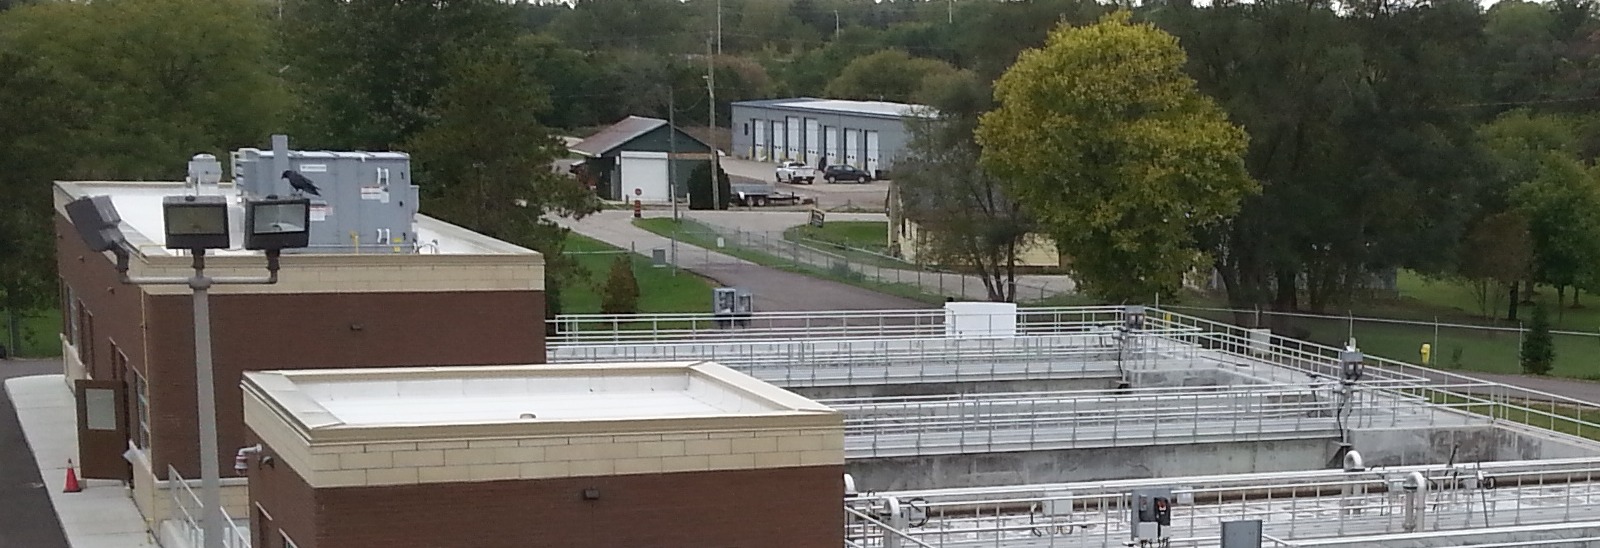 Ingersoll Wastewater Treatment Plant